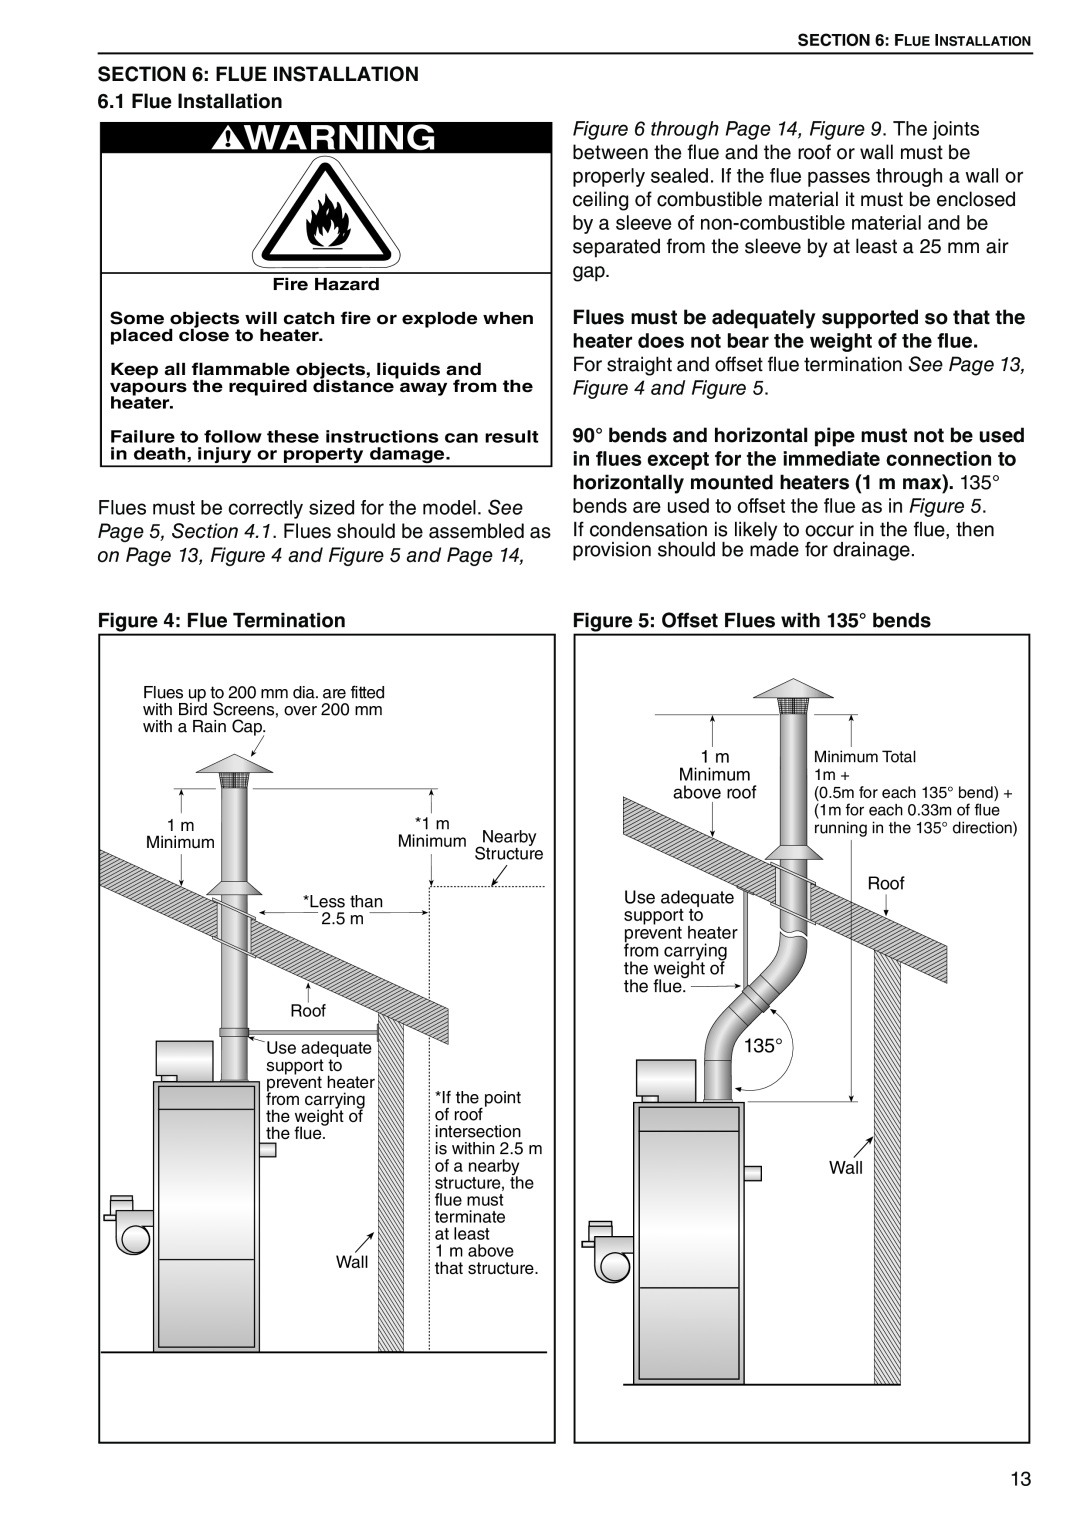 Roberts Gorden POP-ECA/PGP-ECA 015 to 0100 service manual FLUE INSTALLATION 6.1 Flue Installation, on Page 13, and and Page 